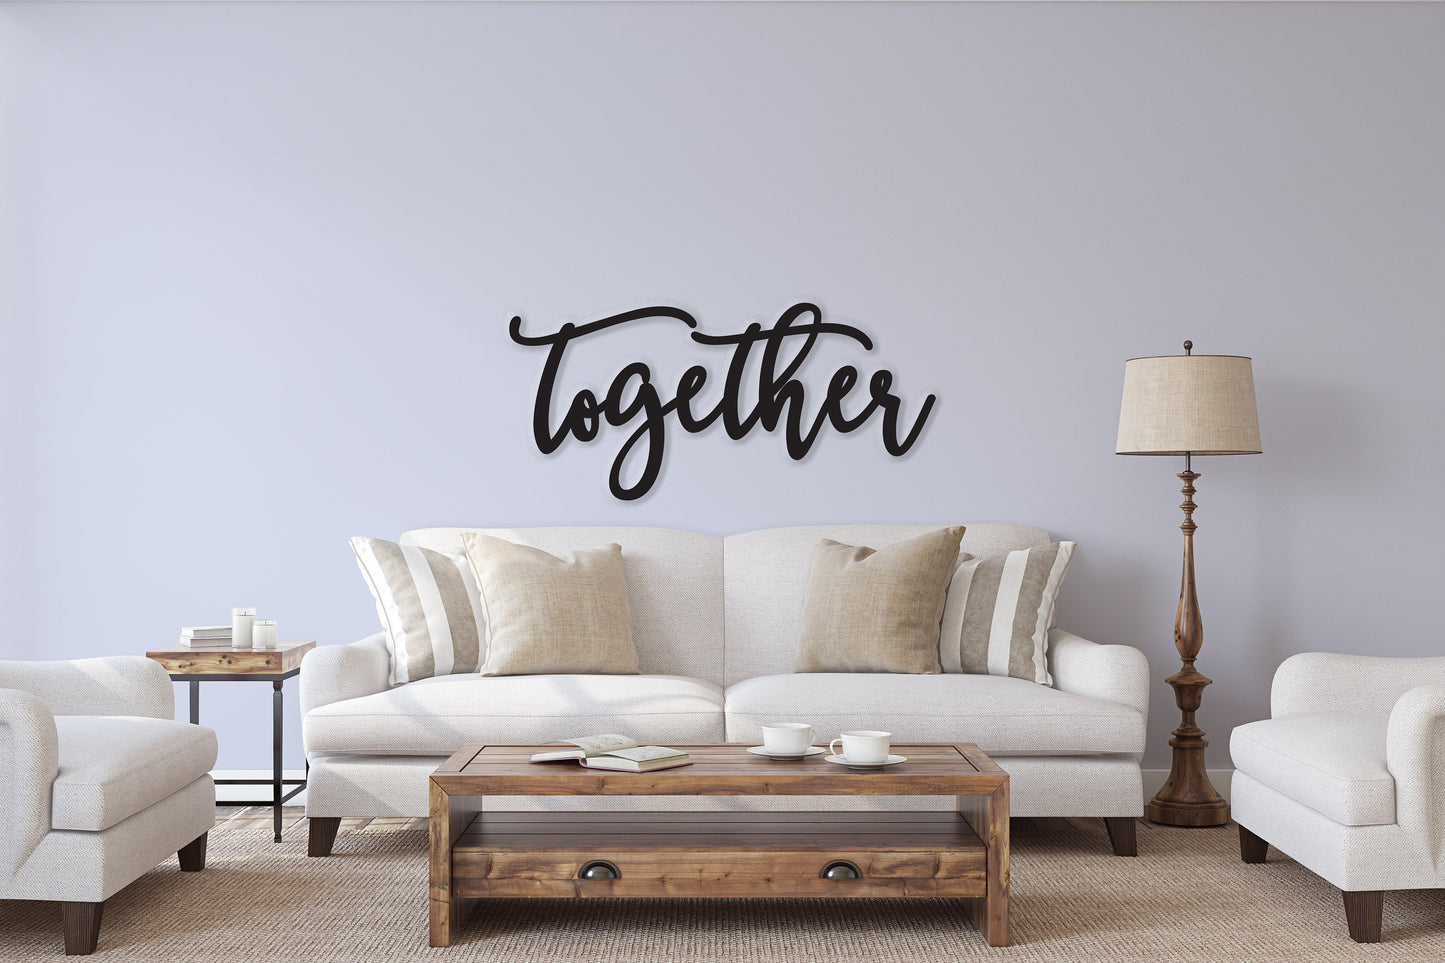 Together sign, Together Wood Sign, Together Wall Decor, Thanksgiving Decor, Together Word Sign, Wood Cut Out Together Sign, Family decor